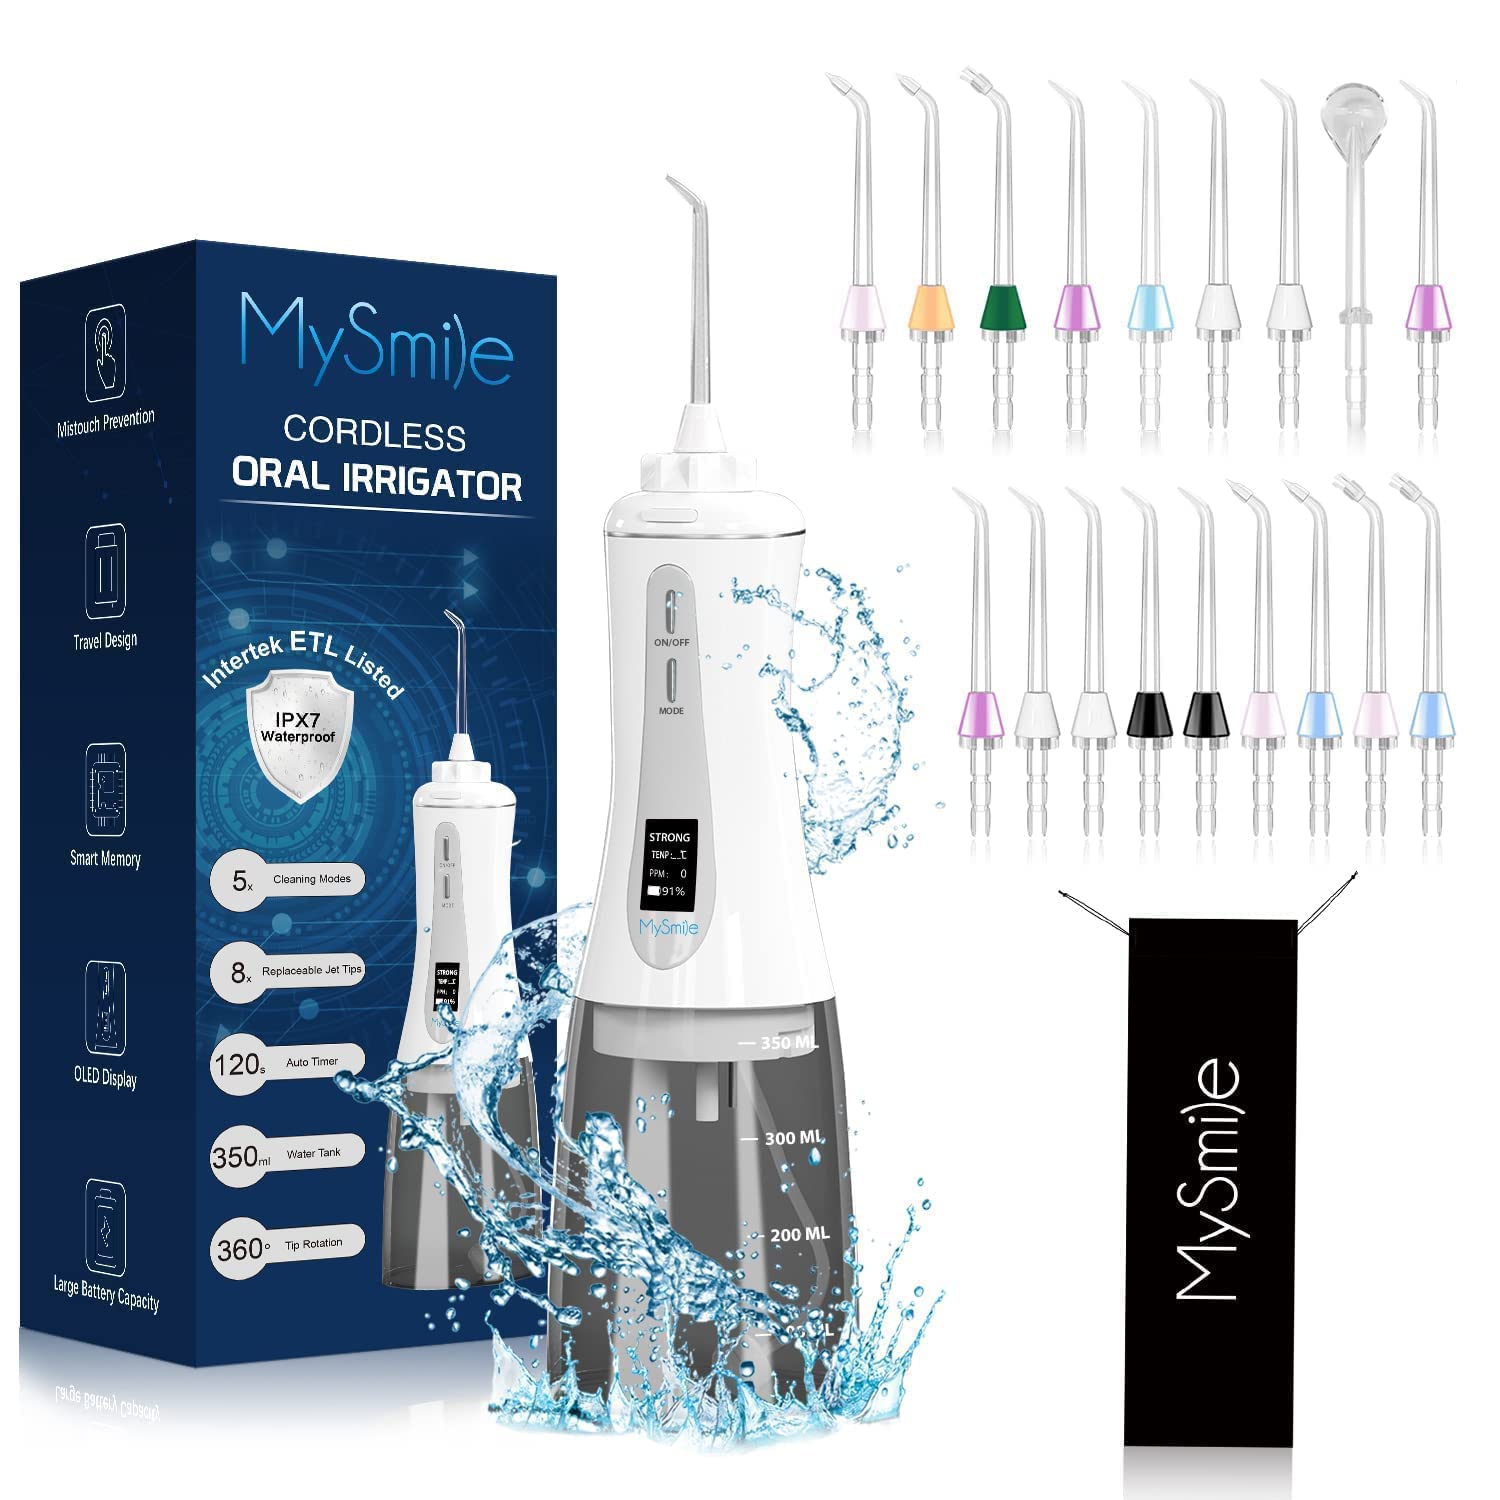 MySmile Powerful Cordless Water Dental Flosser Portable Oral Irrigator with OLED Display 5 Modes 18 Replaceable Jet Tips and 350 ML Detachable Water Tank for Home Travel Use White